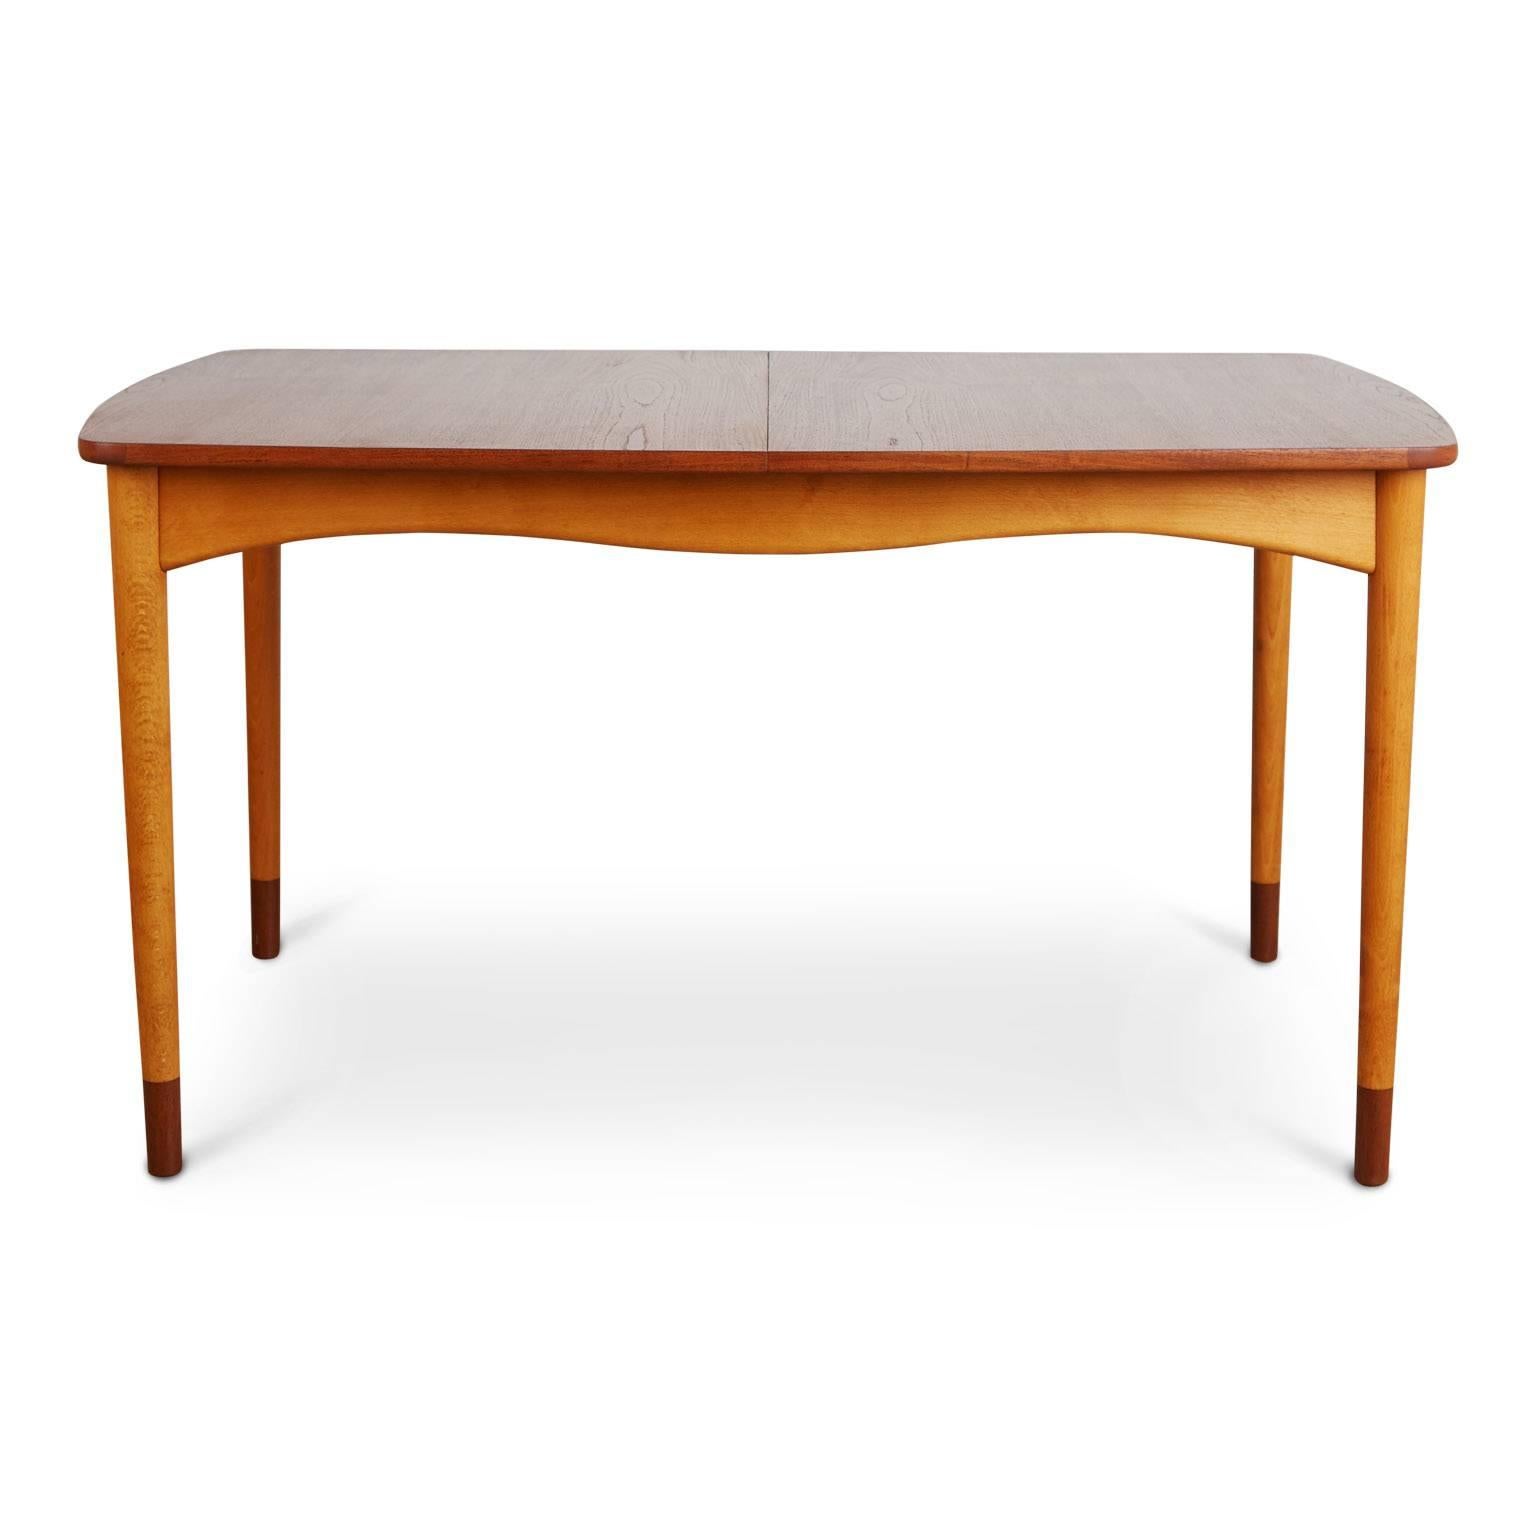 Designed by Finn Juhl and attributed to Bovirke or Soren Willadsen, circa 1960, this sleek and simple table is an excellent example of the Danish architect and designer's work. Comprising of clean lines with neat and functional construction that